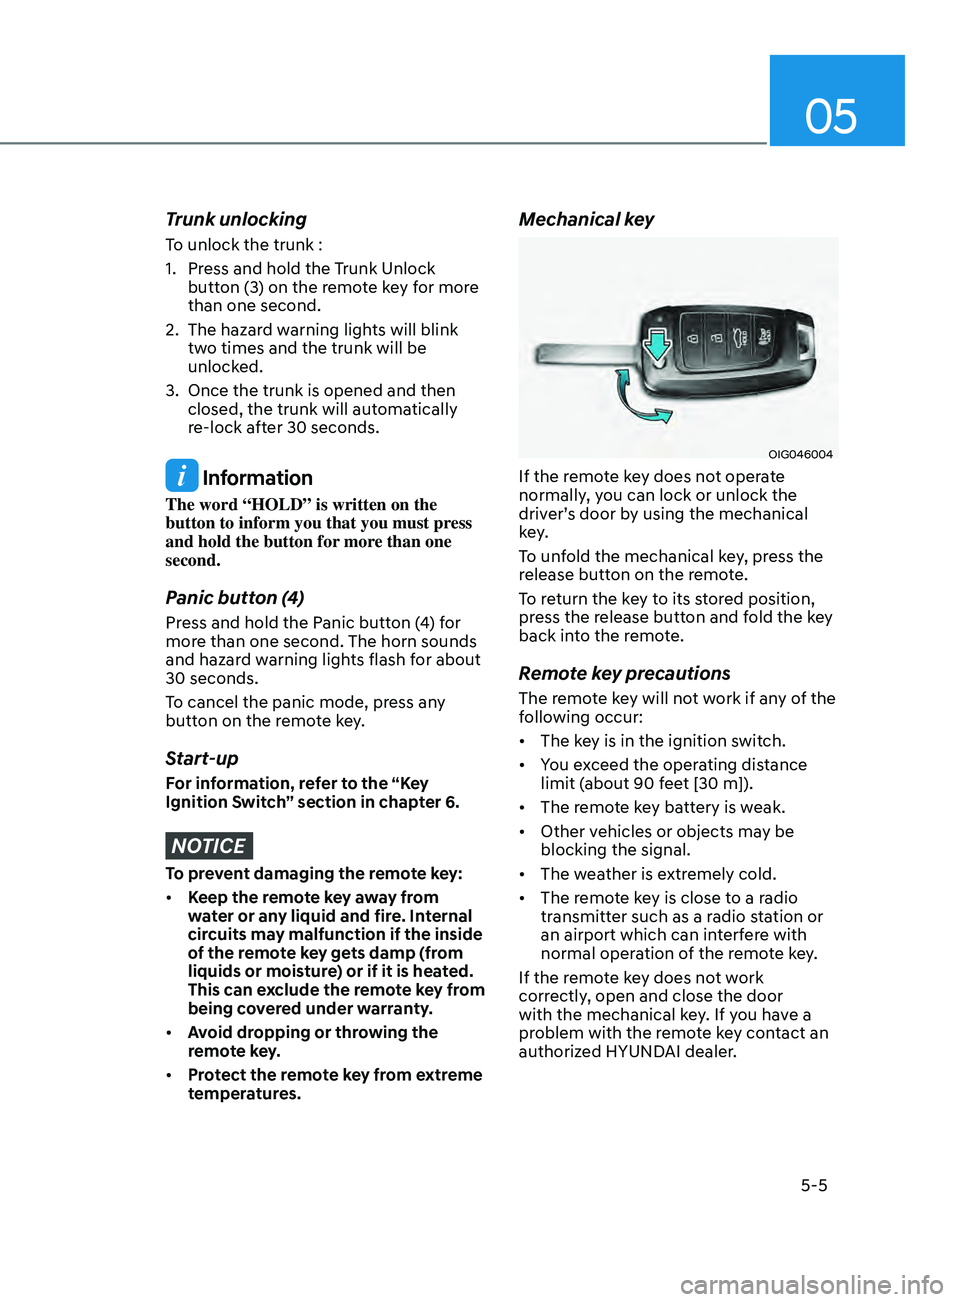 HYUNDAI SONATA 2021  Owners Manual 05
5-5
Trunk unlocking
To unlock the trunk :
1. 
Pr
 ess and hold the Trunk Unlock 
button (3) on the remote key for more 
than one second.
2.
 
The hazar
 d warning lights will blink 
two times and t